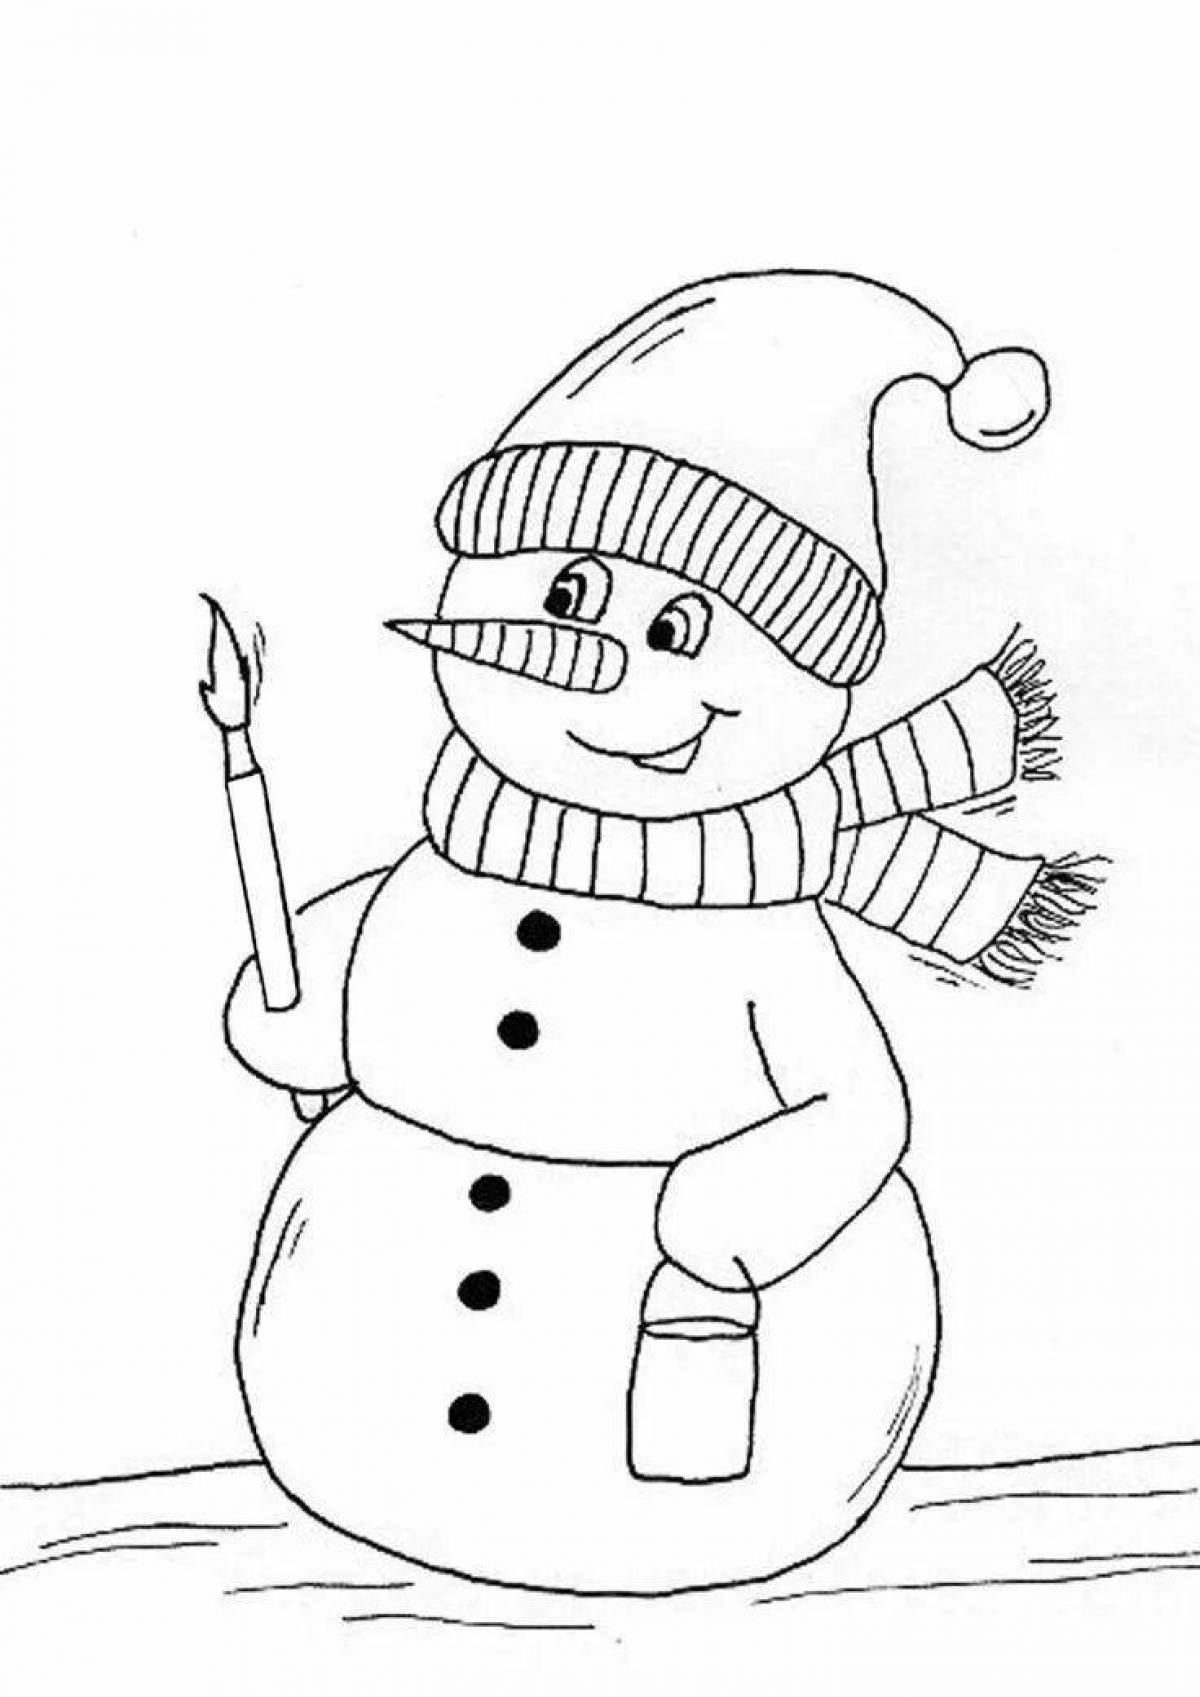 Ink-filled snowman coloring book for 2-3 year olds